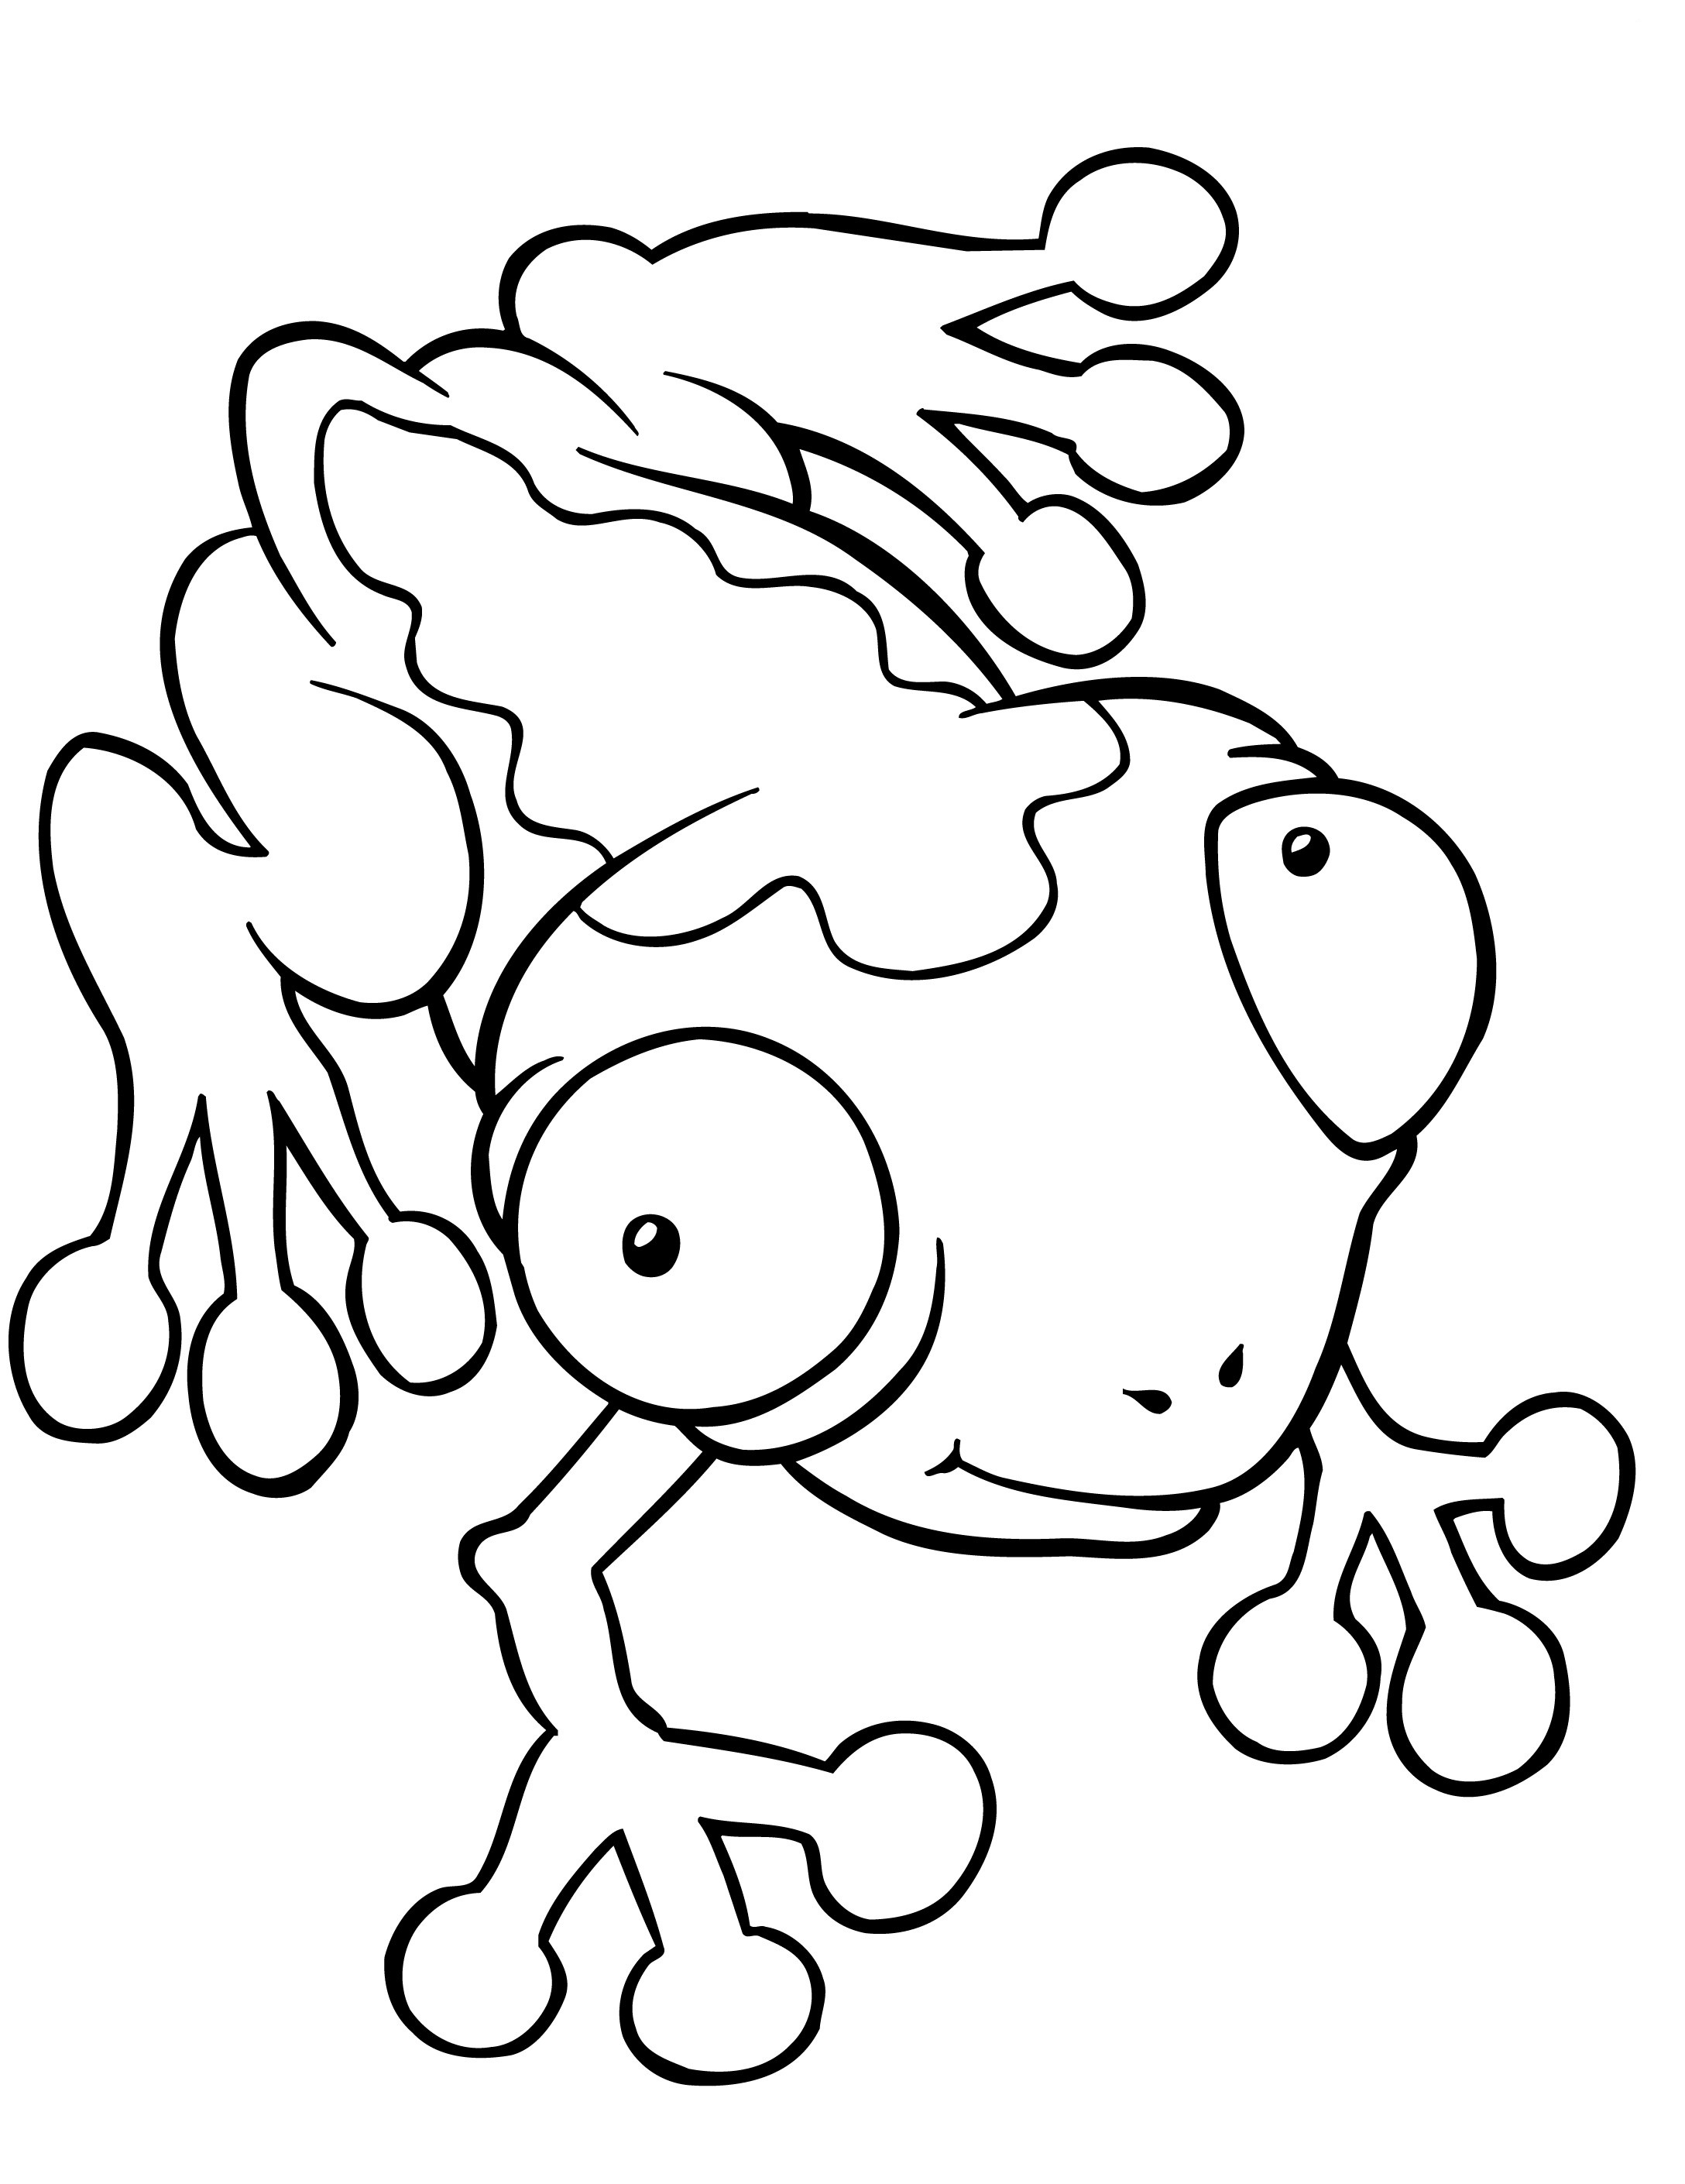 free frog coloring pages pin by 妮 關 on game animals design ref frog coloring frog coloring free pages 